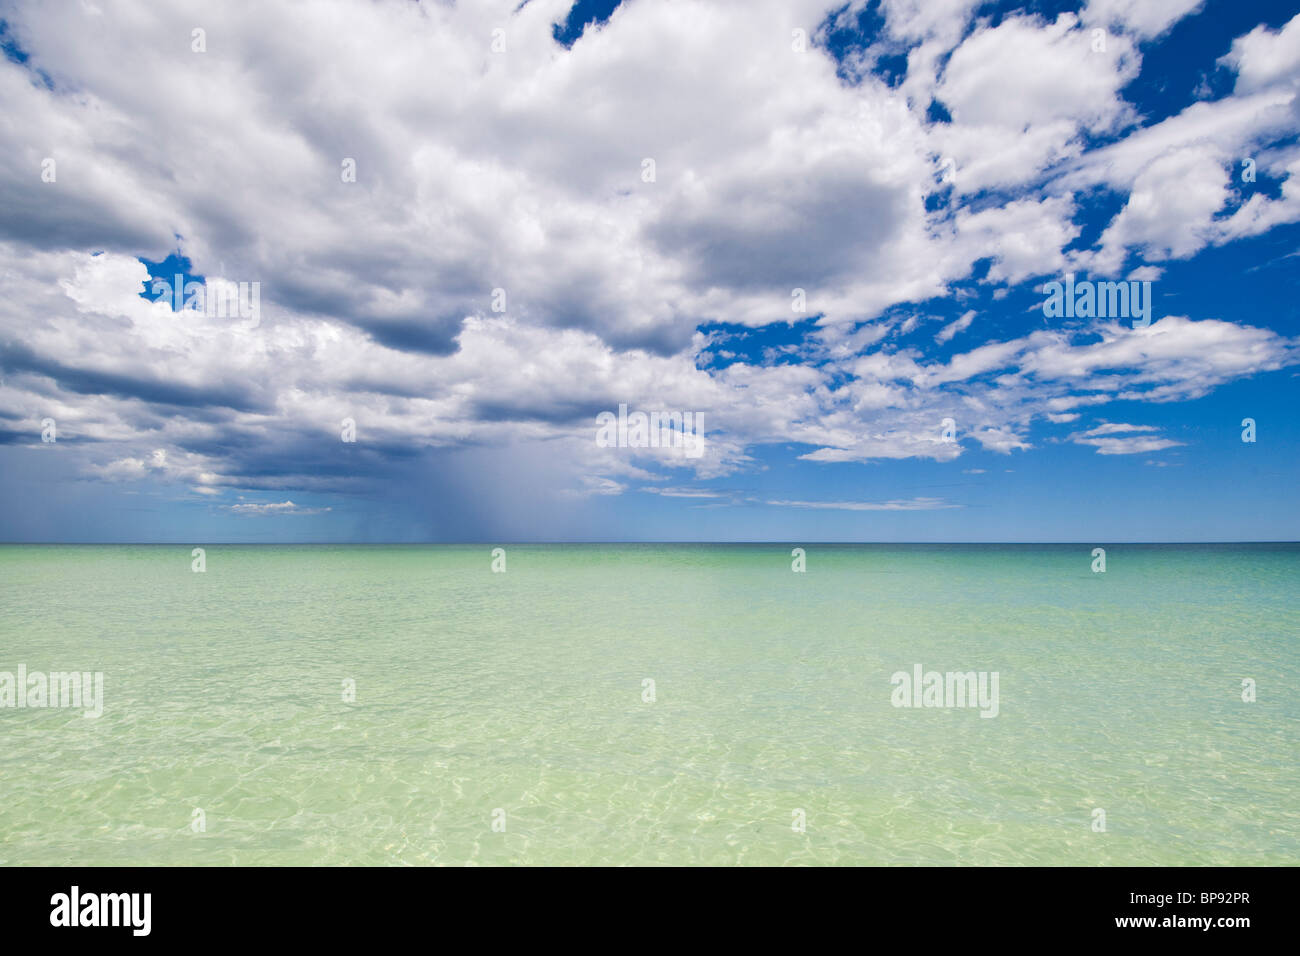 Storm clouds above emerald green water of Nuytsland Nature Reserve, Western Australia. Stock Photo